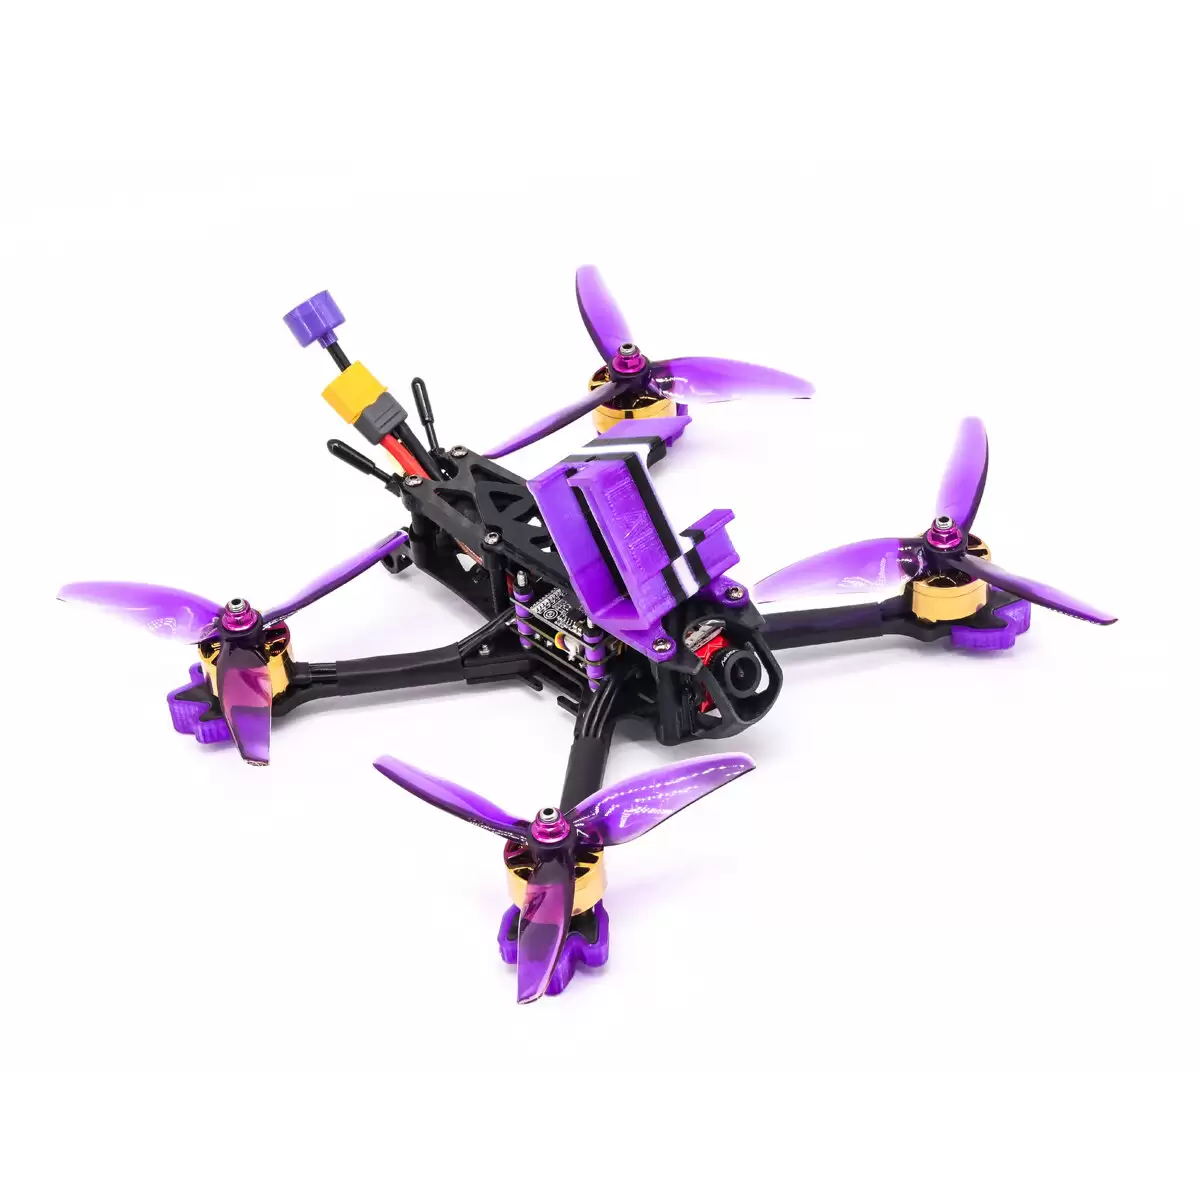 Order In Just $160.65 For Eachine Lal 5style 220mm 4s Freestyle 5 Inch Fpv Racing Drone Pnp/bnf F4 Bluetooth Fc Caddx Ratel 2307 2450kv Motor 50a Blheli_32 Esc With This Coupon At Banggood